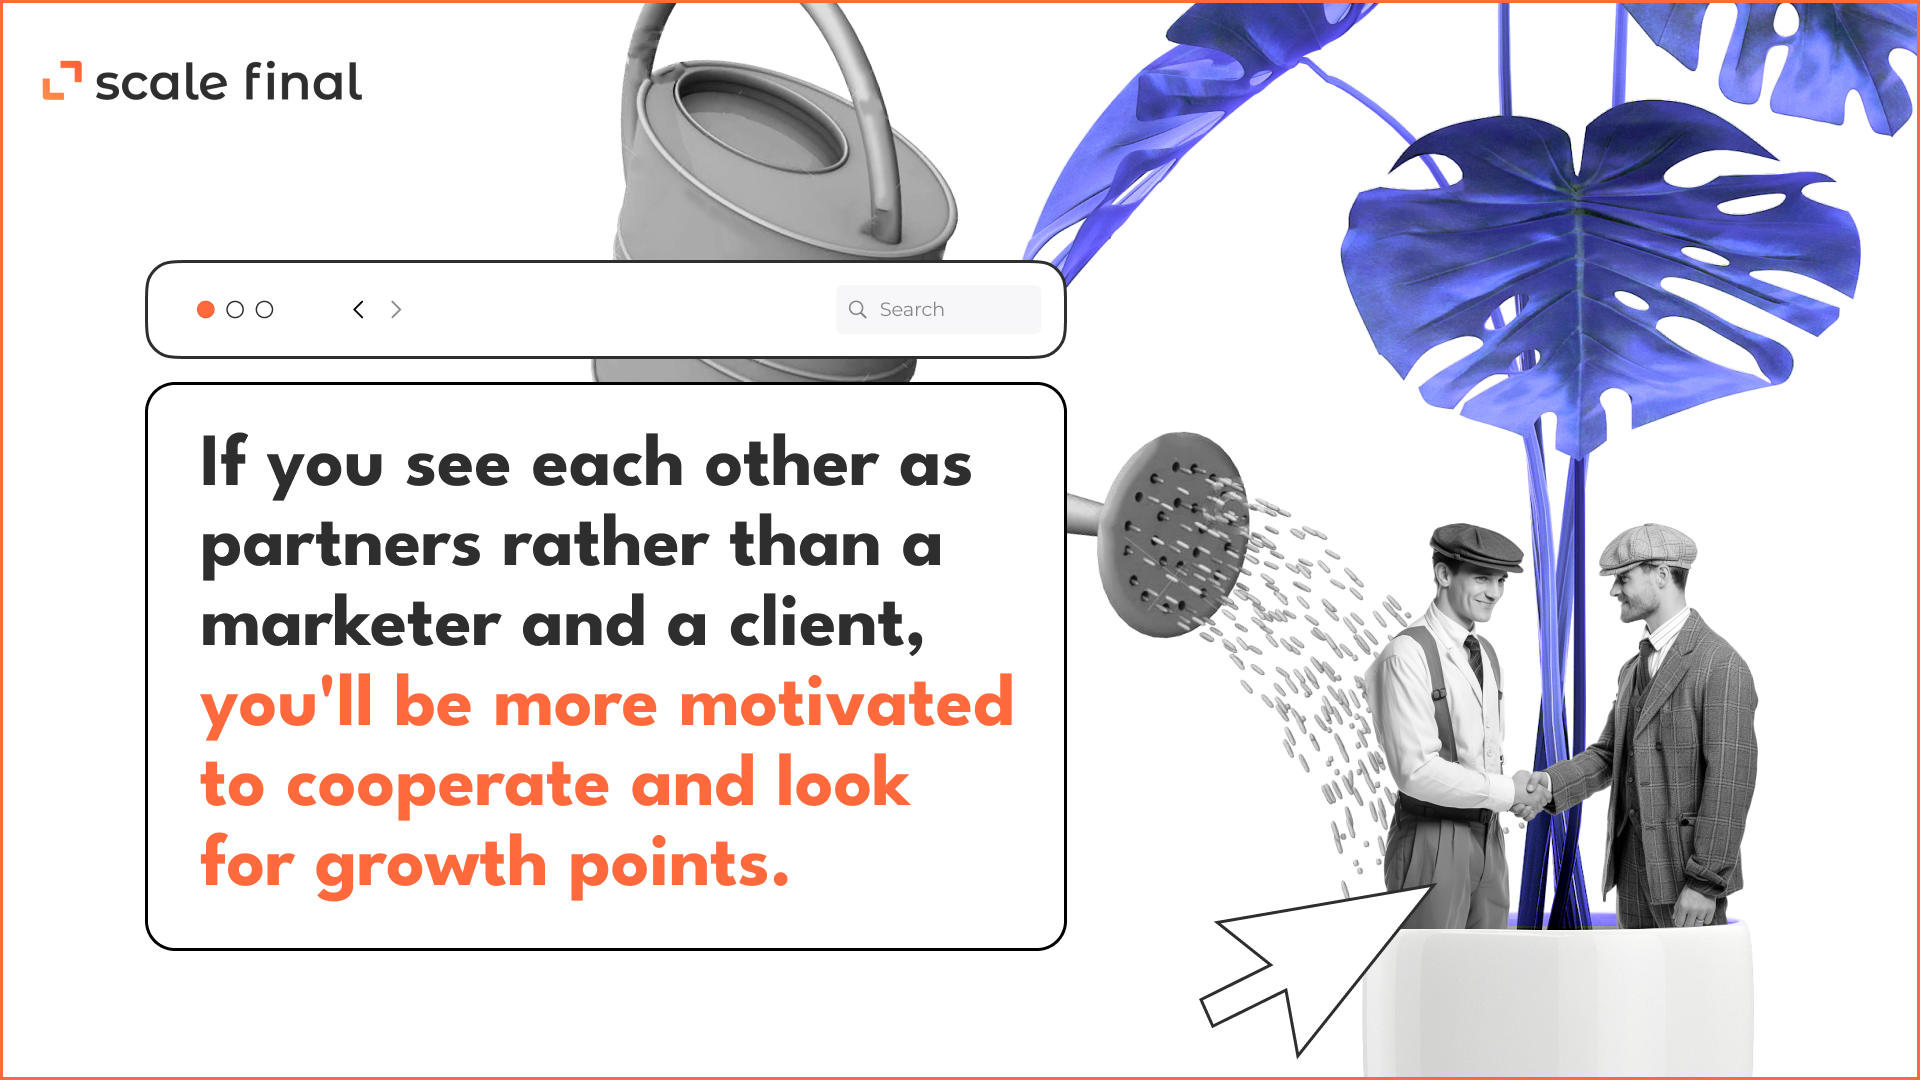 if you see each other as partners rather than a marketer and a client, you'll be more motivated to cooperate and look for growth points.